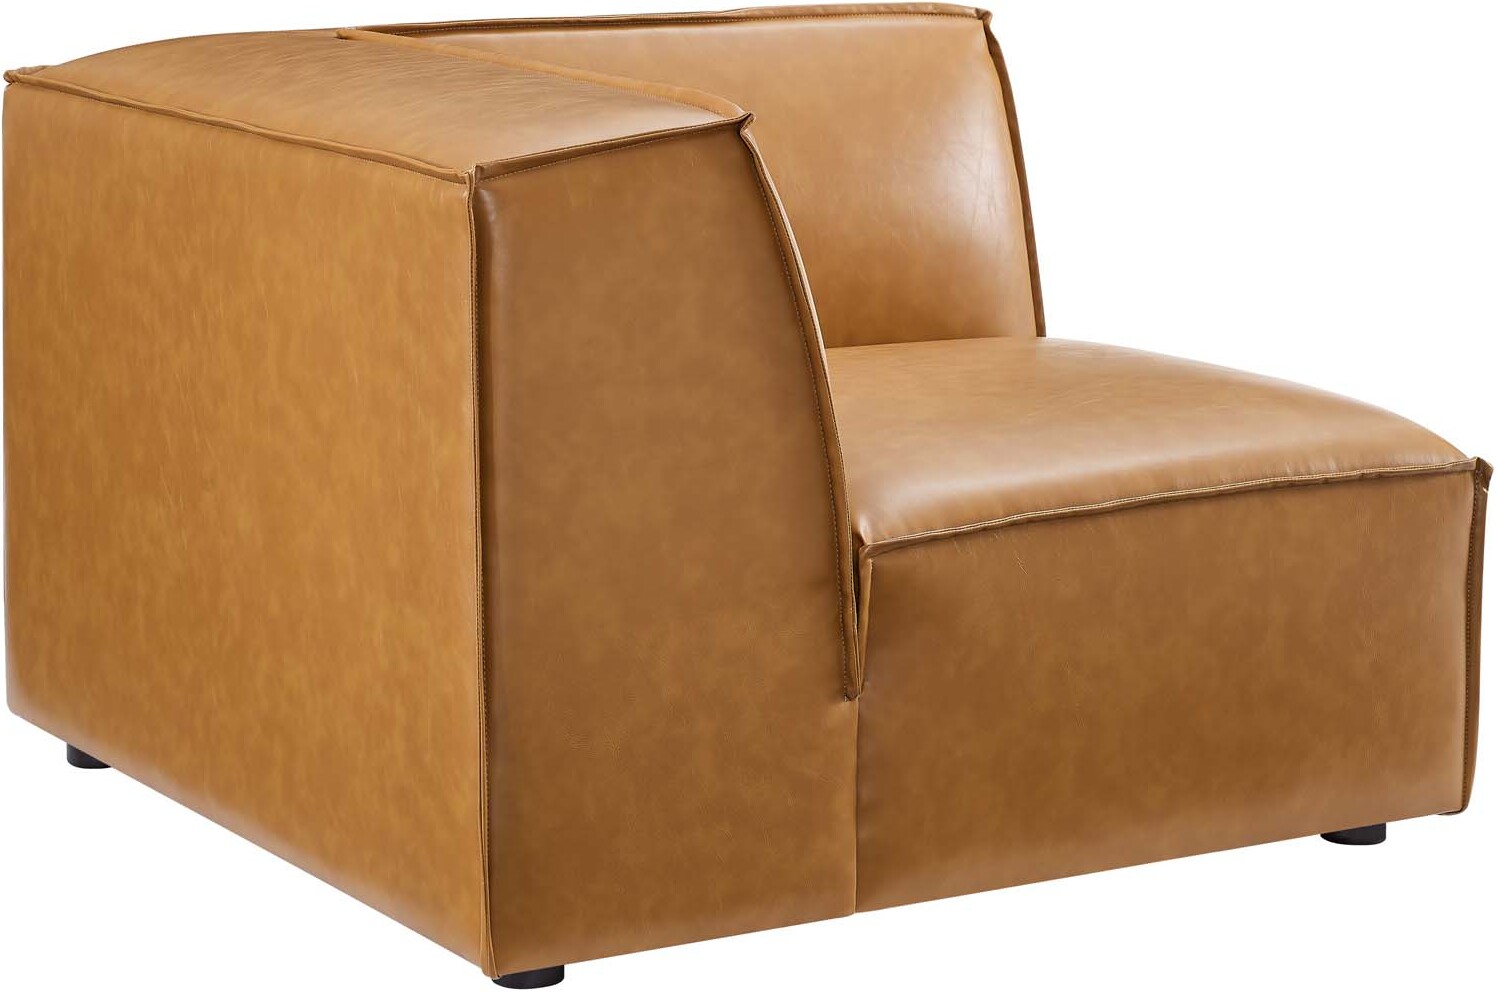 Re Vegan Leather Sectional Sofa, Square Corner Leather Chair